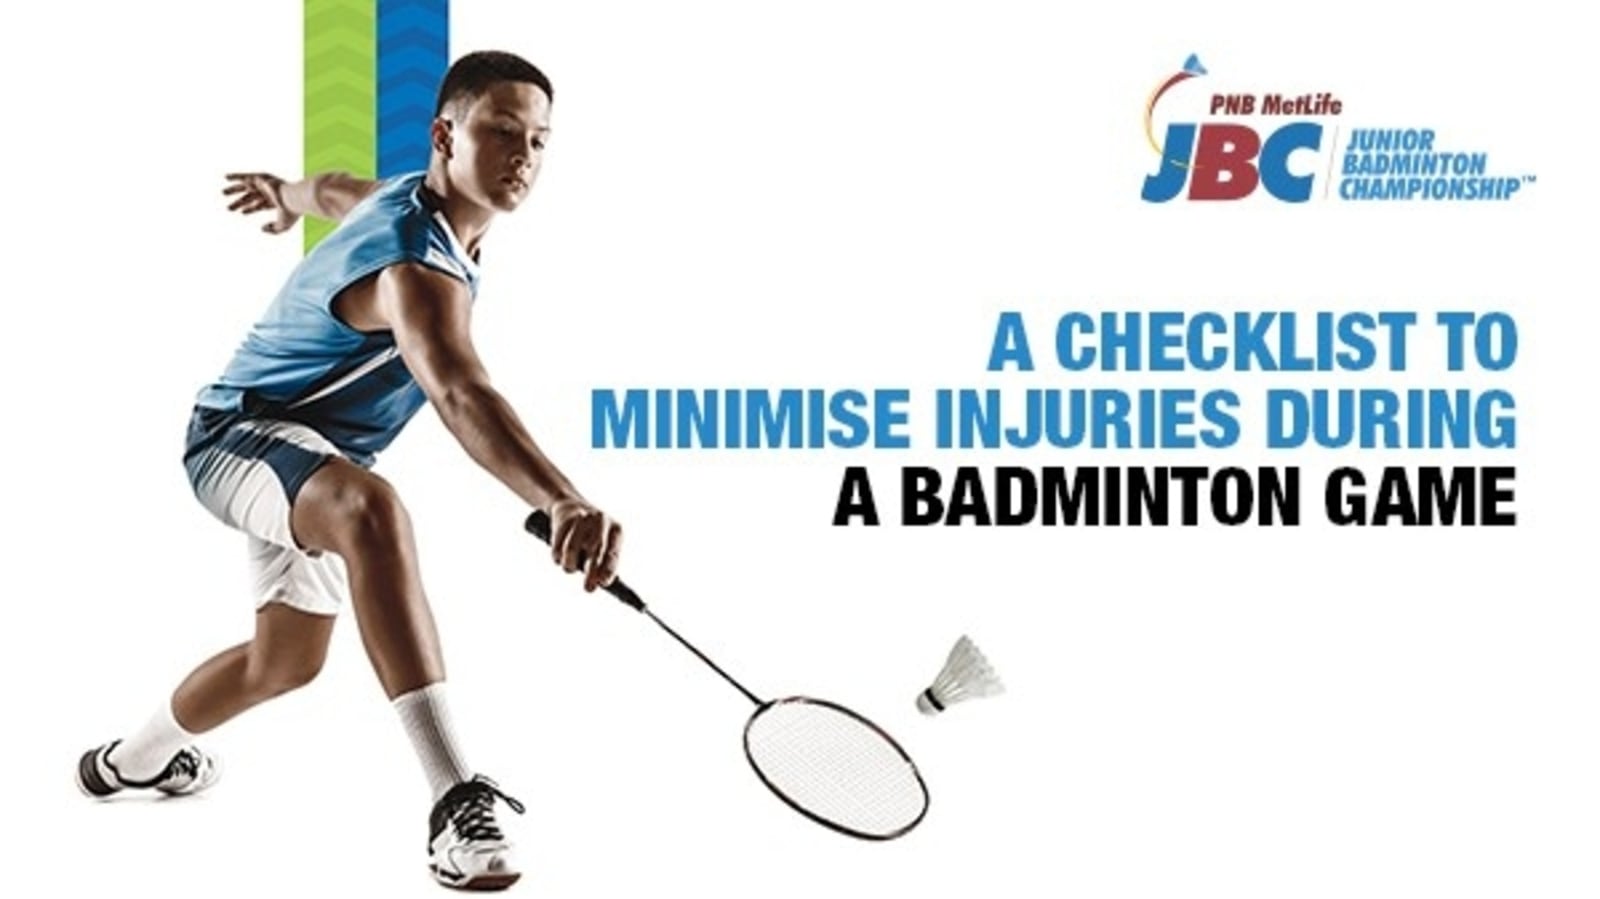 The most common injuries in badminton